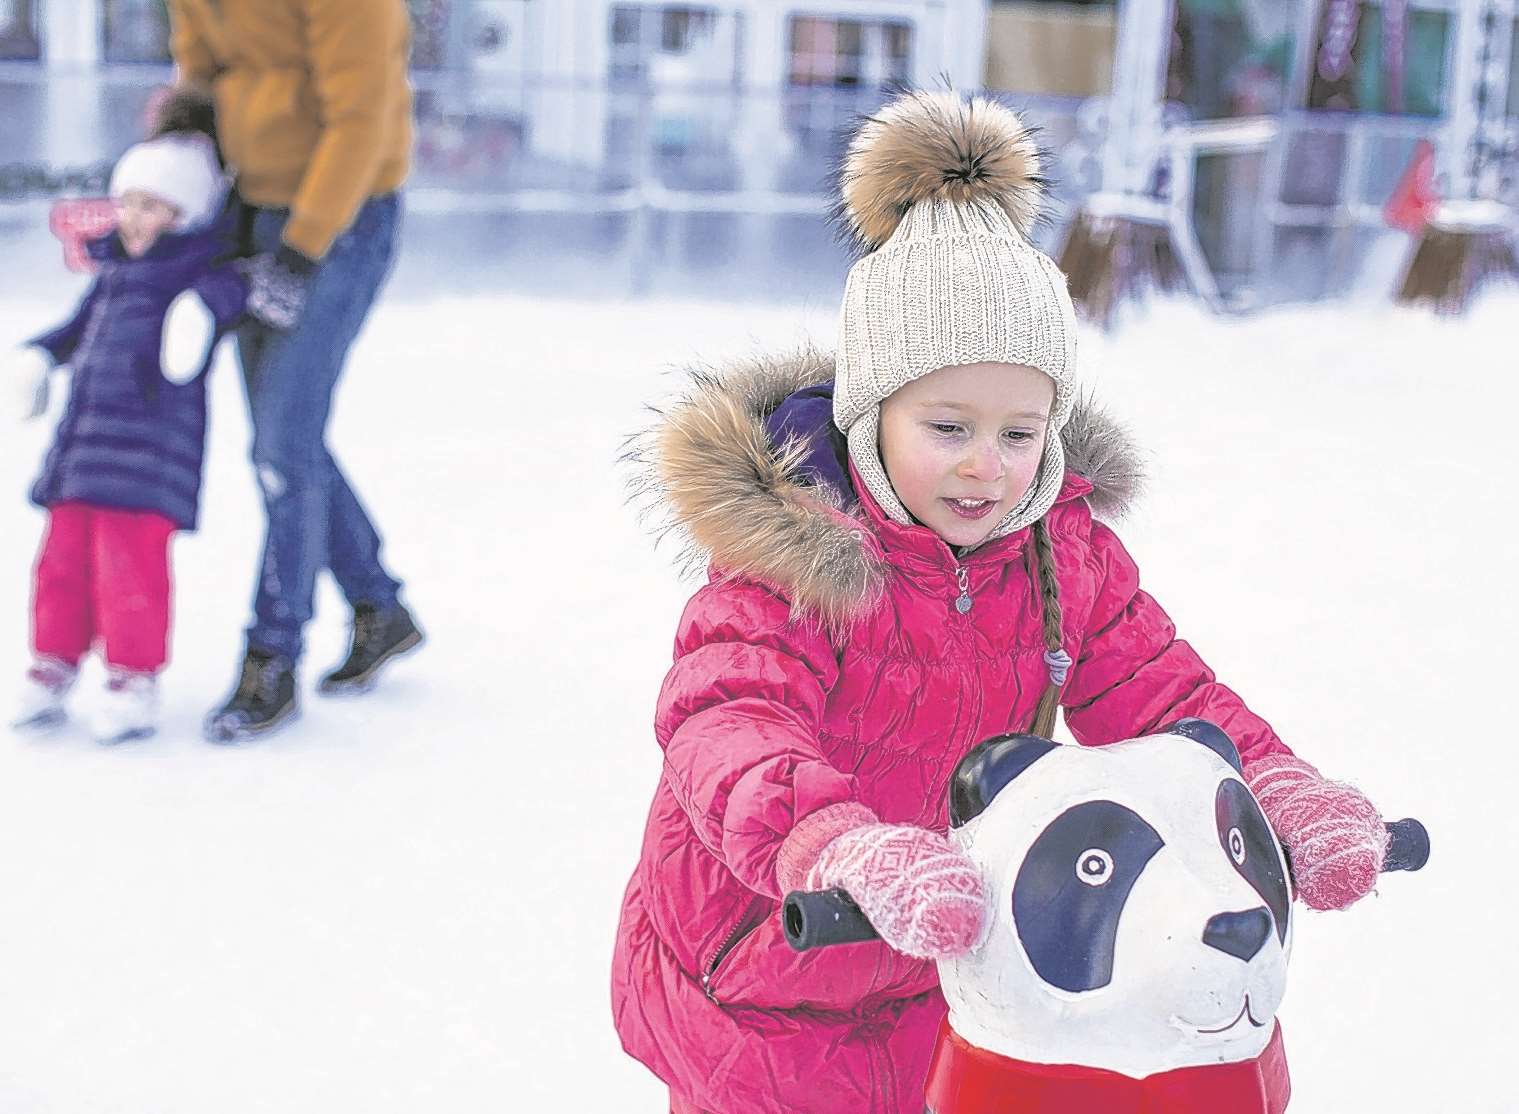 Try ice skating in Tunbridge Wells this Christmas